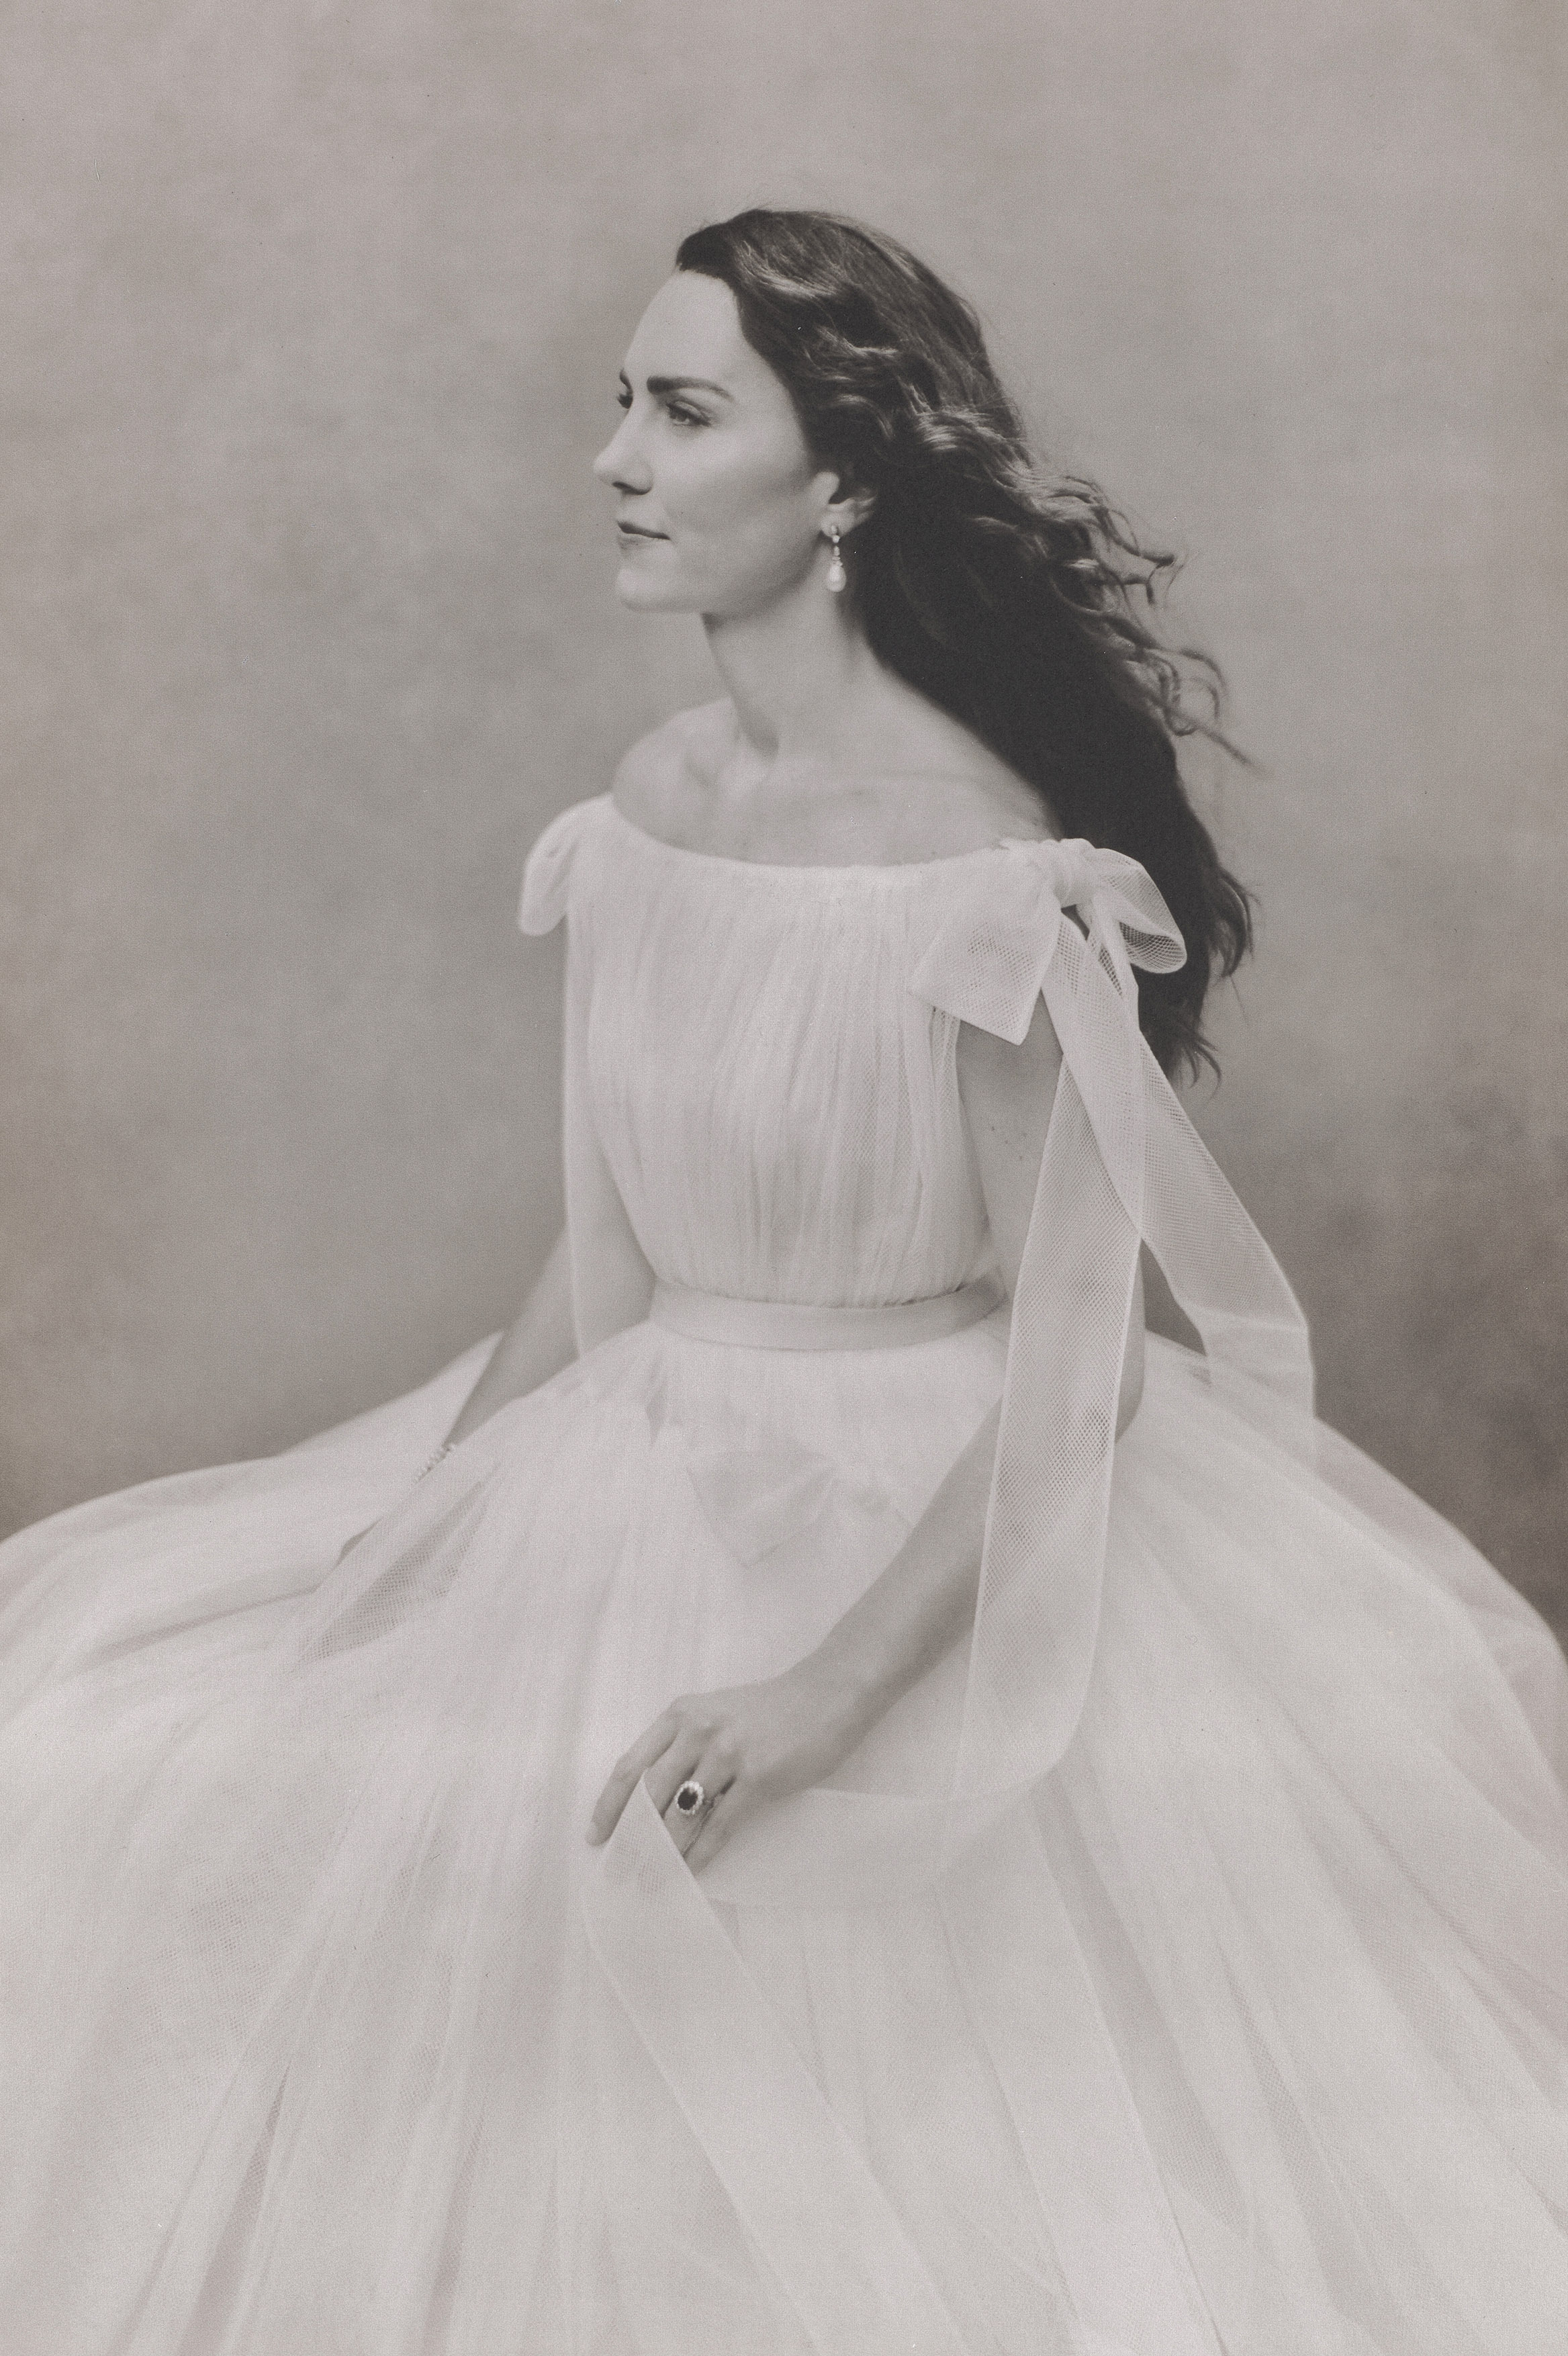 A black and white image taken of the Princess of Wales in 2021 with her in a dress 